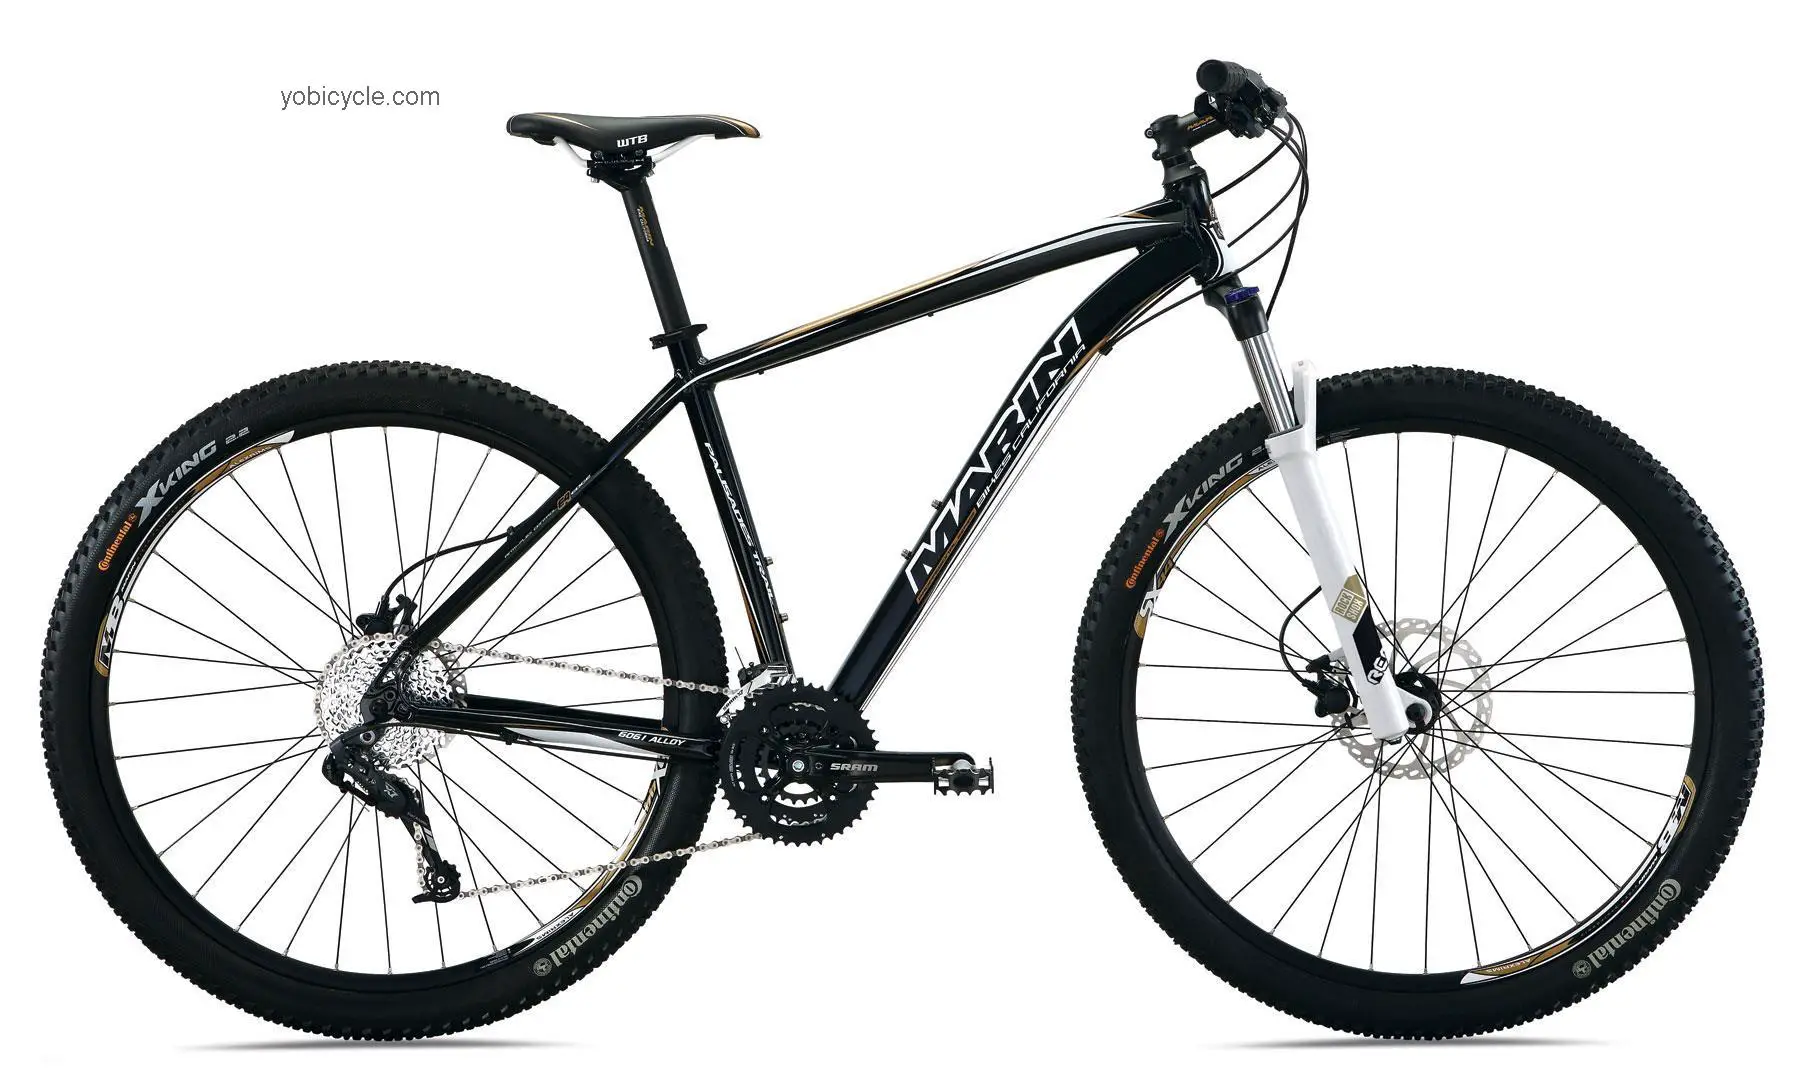 Marin Palisades Trail 29er 2012 comparison online with competitors